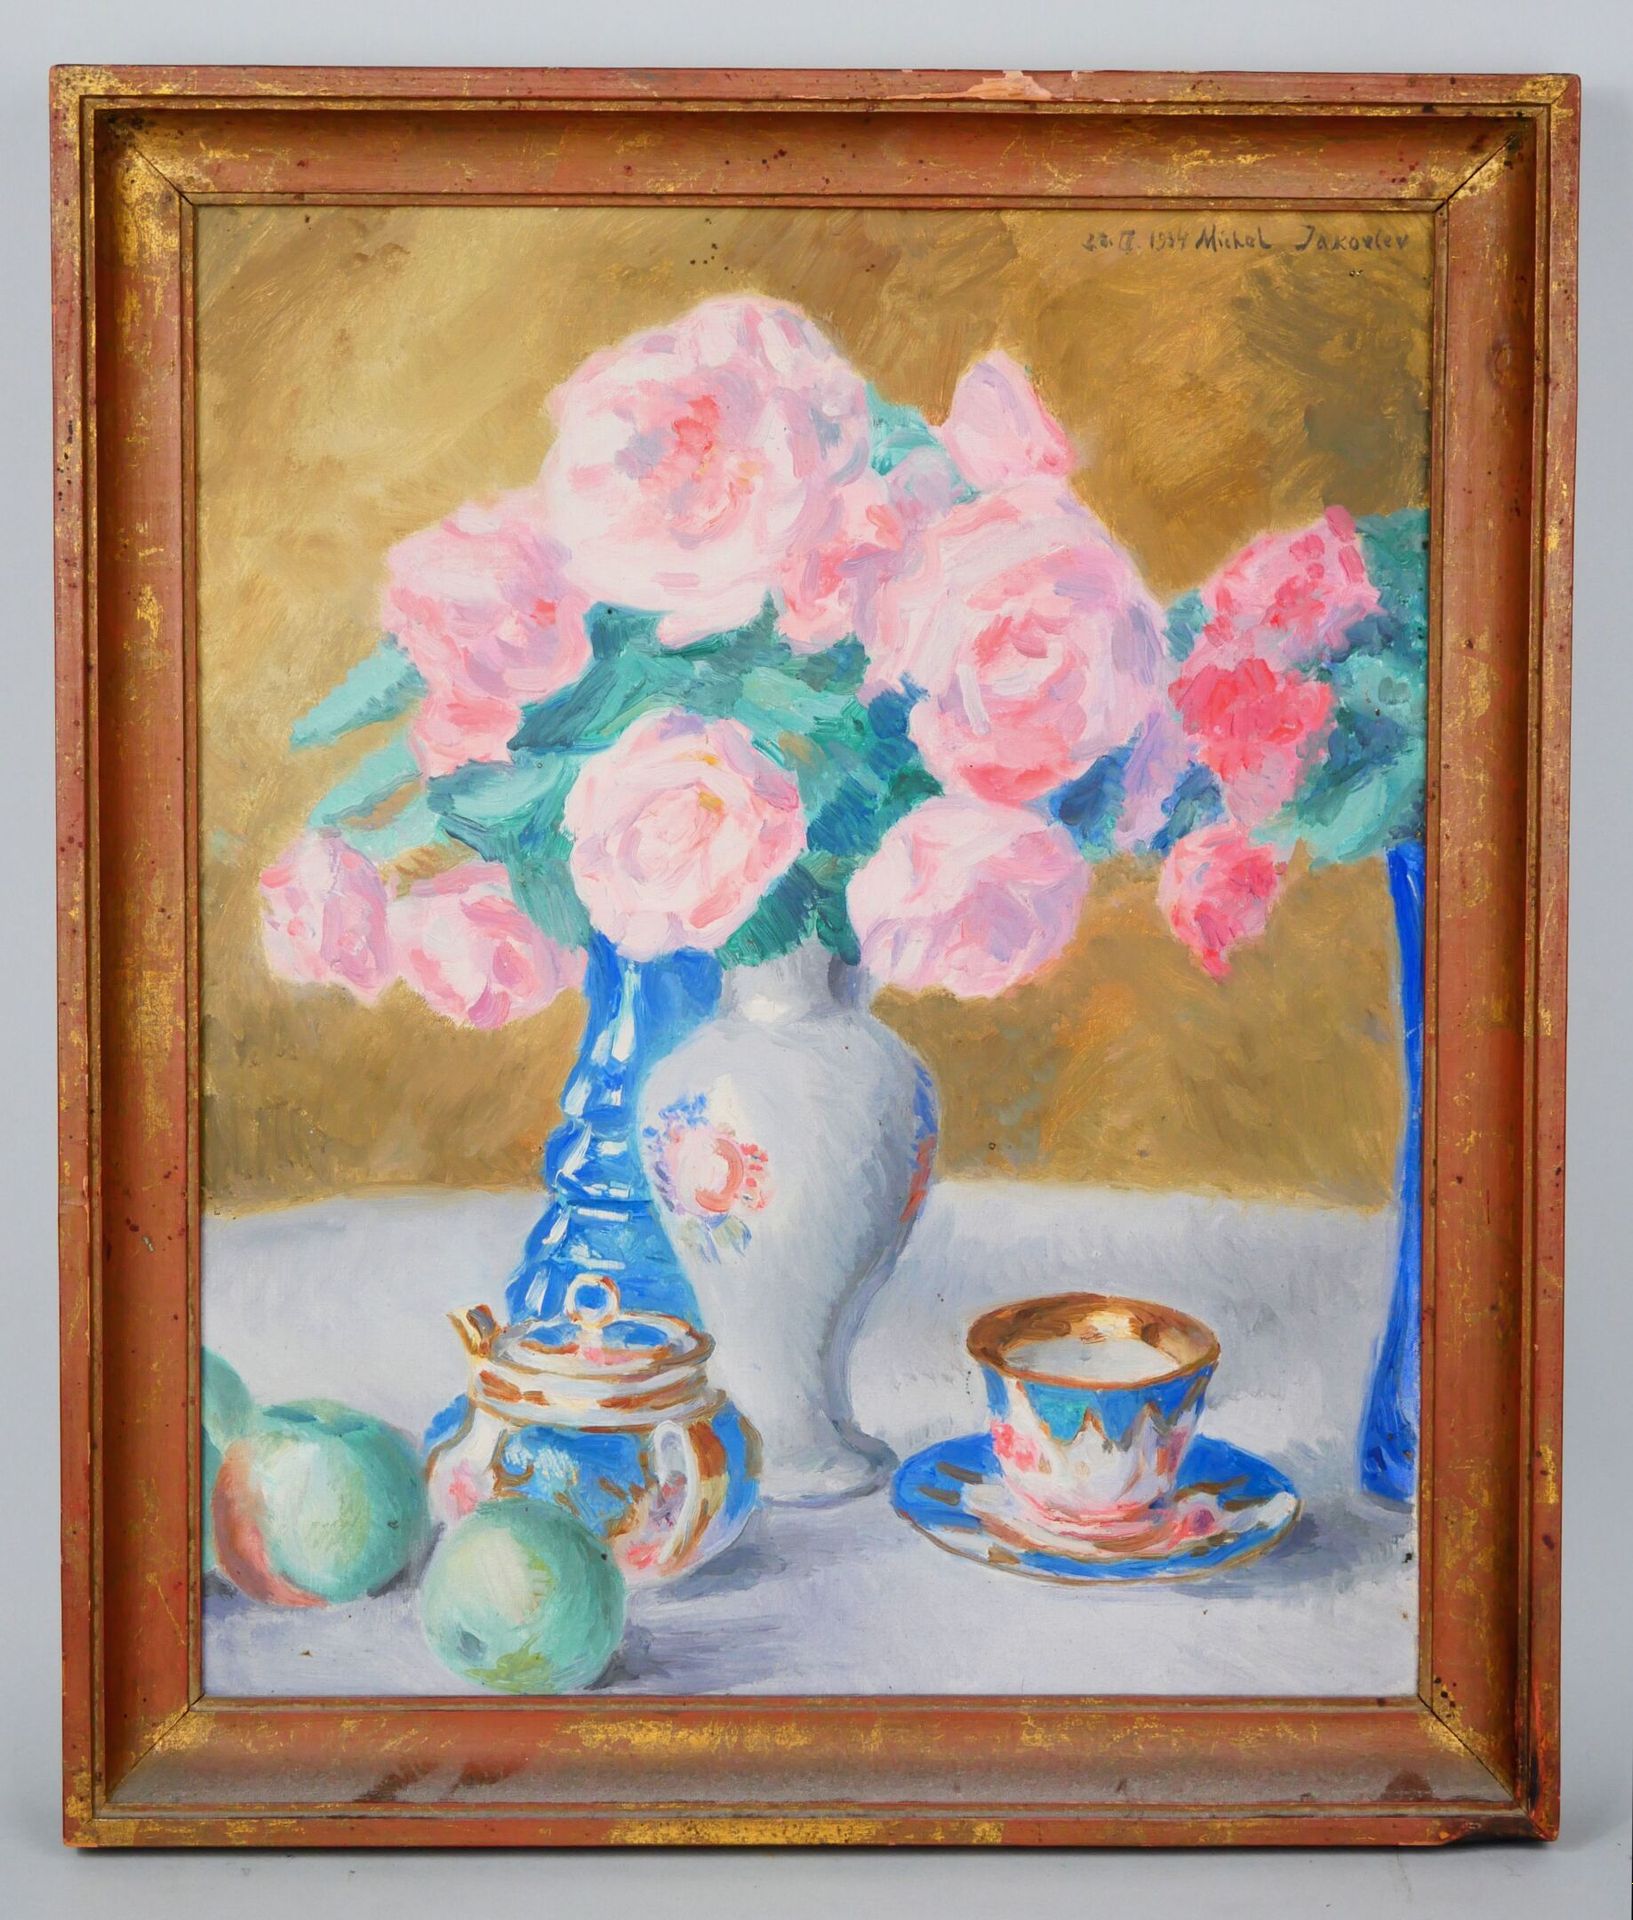 Null Mikhail Nikolaevich YAKOVLEV (1880-1942)
Still life with a bunch of roses
O&hellip;